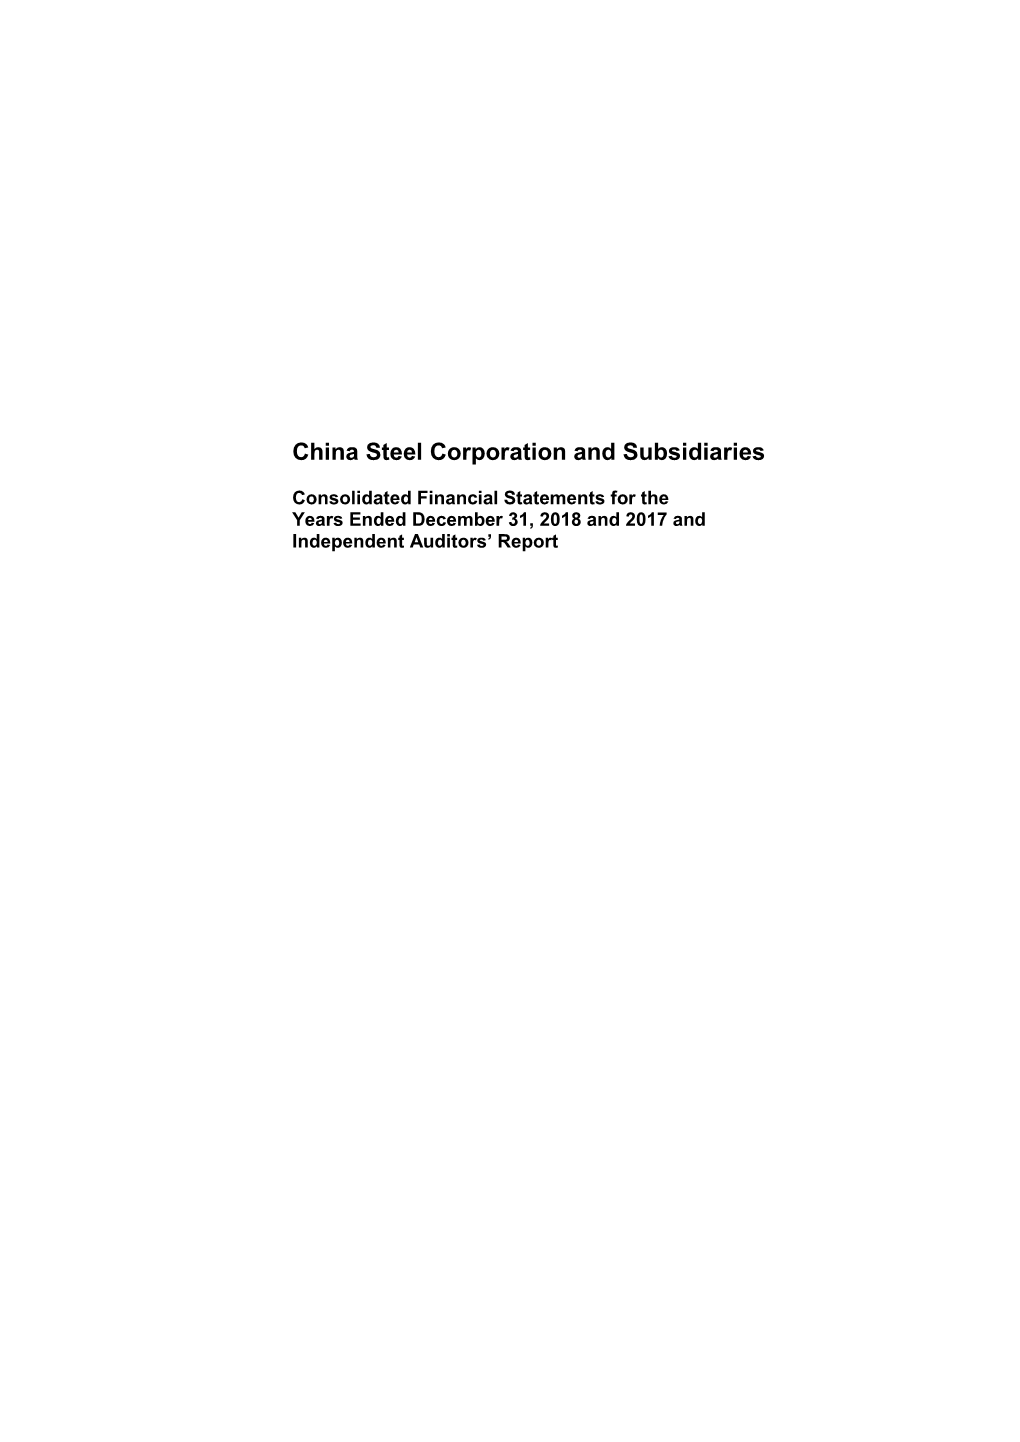 China Steel Corporation and Subsidiaries